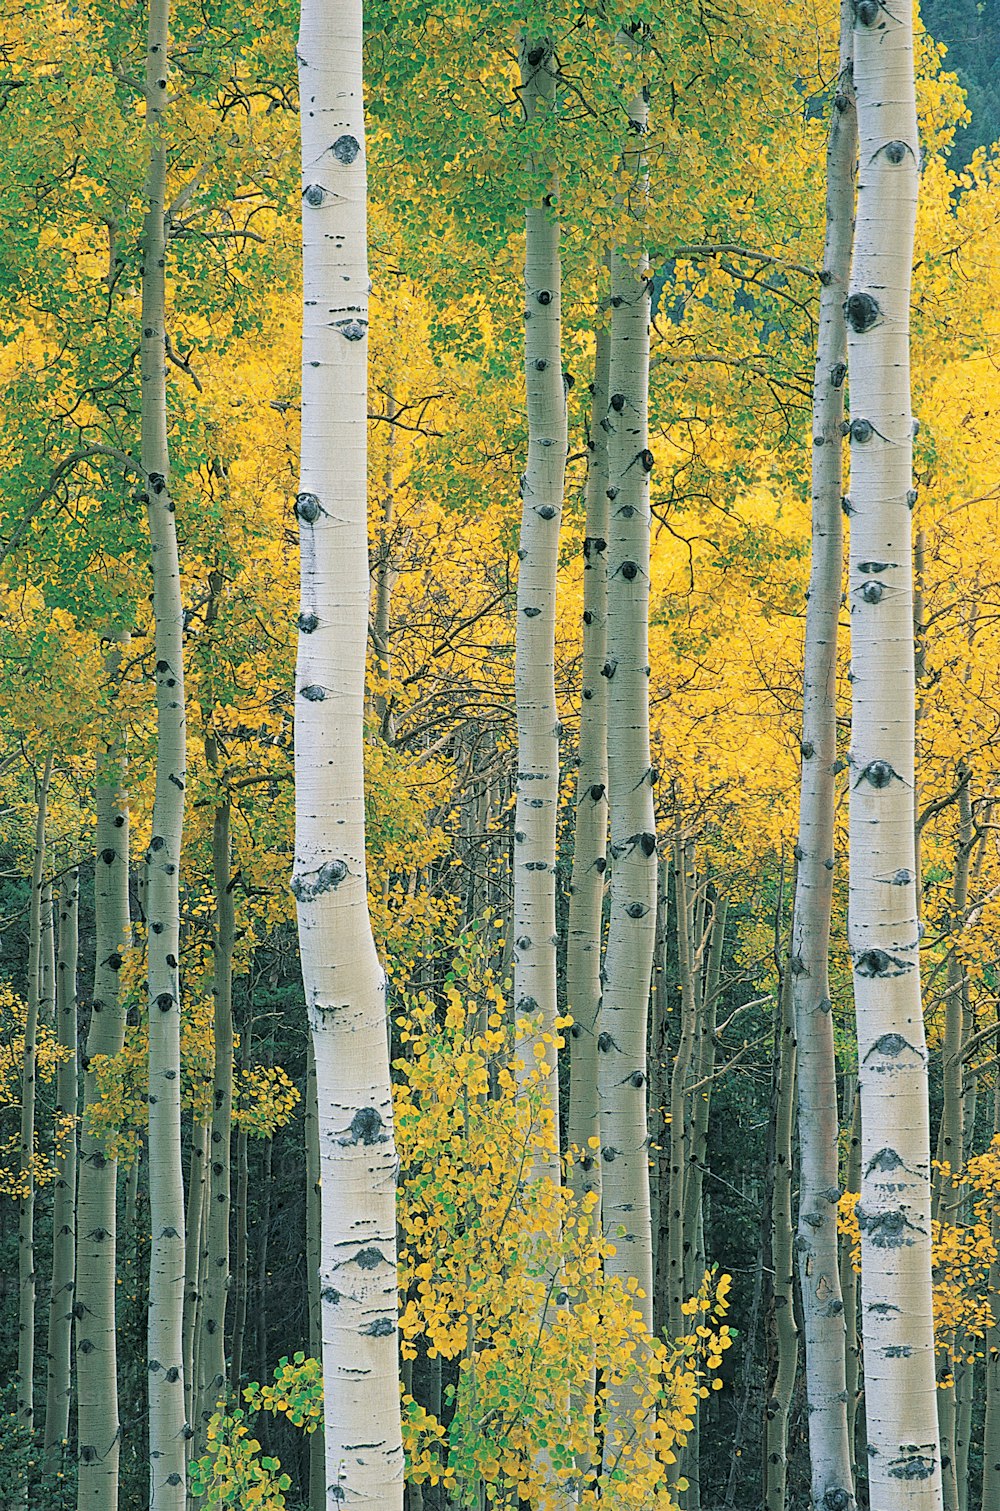 a group of trees with yellow leaves in a forest